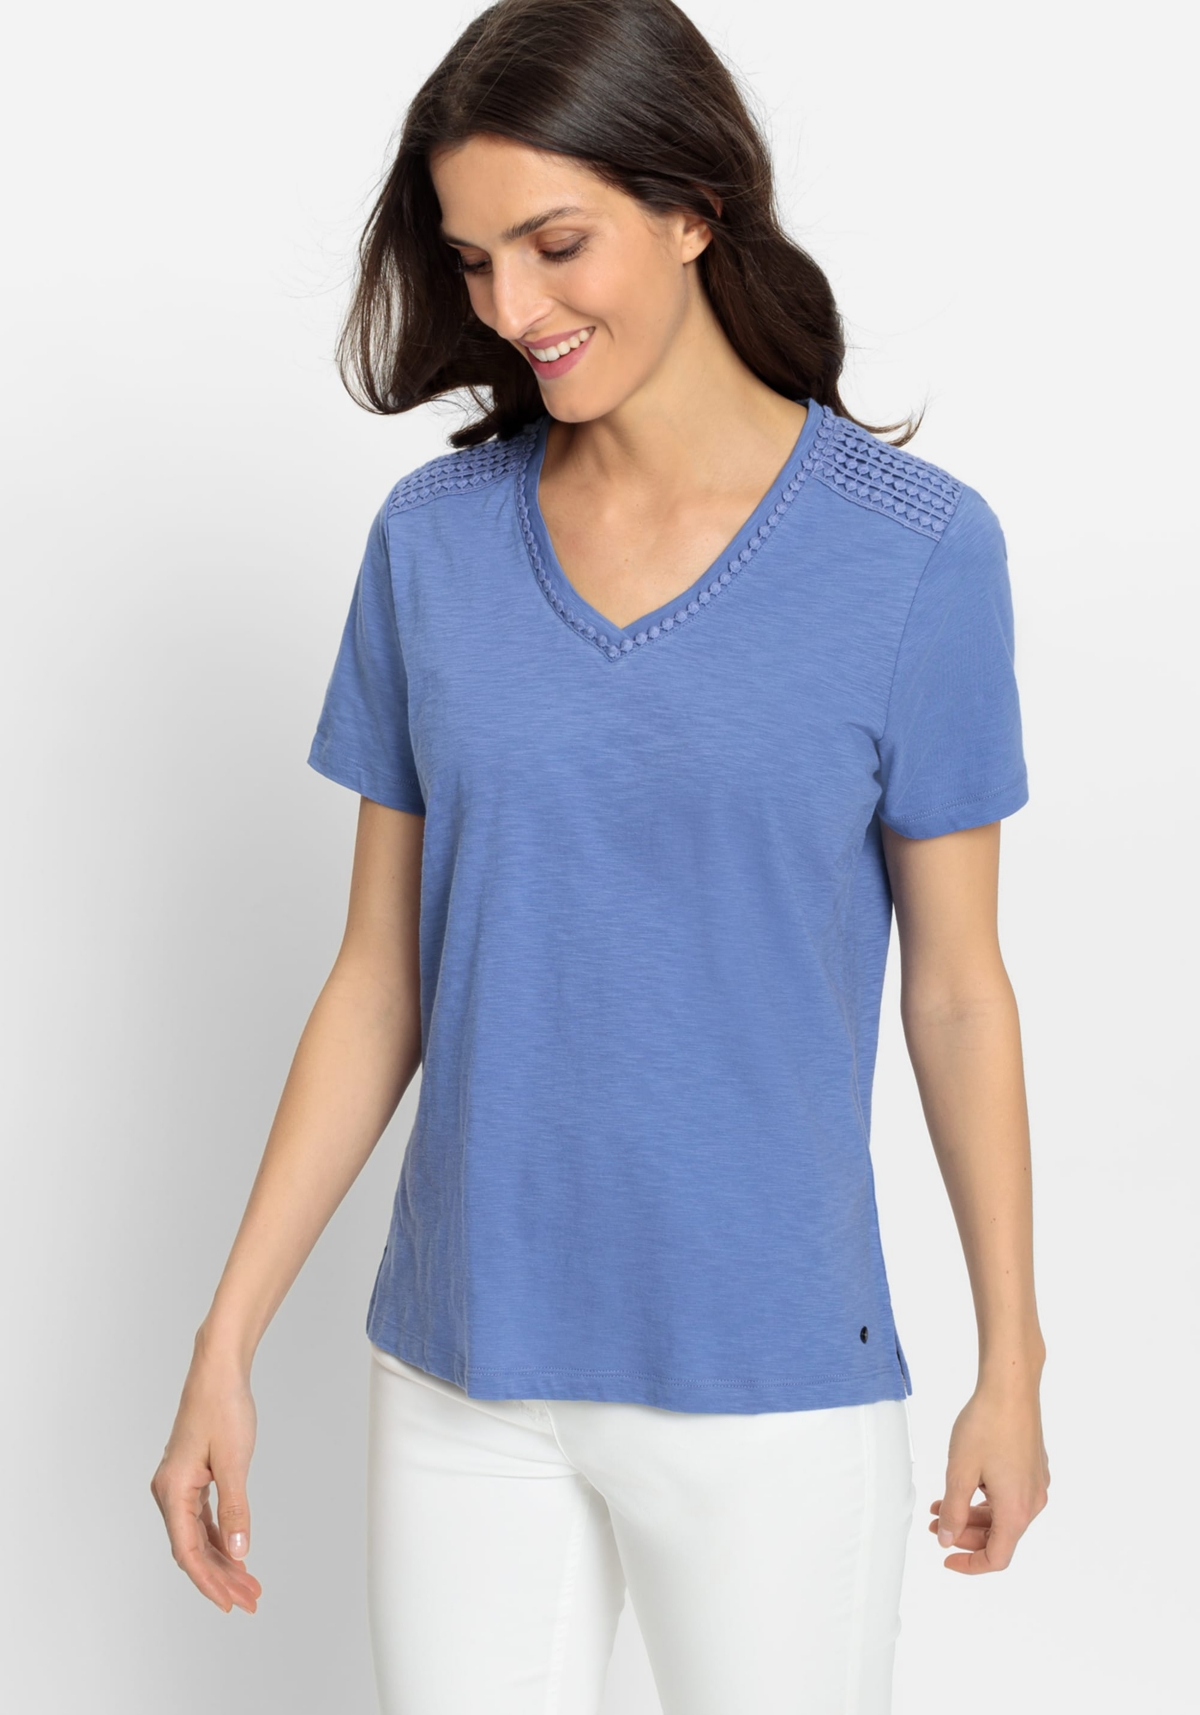 Women's Short Sleeve Tee with Embroidered Trim - Bleached denim